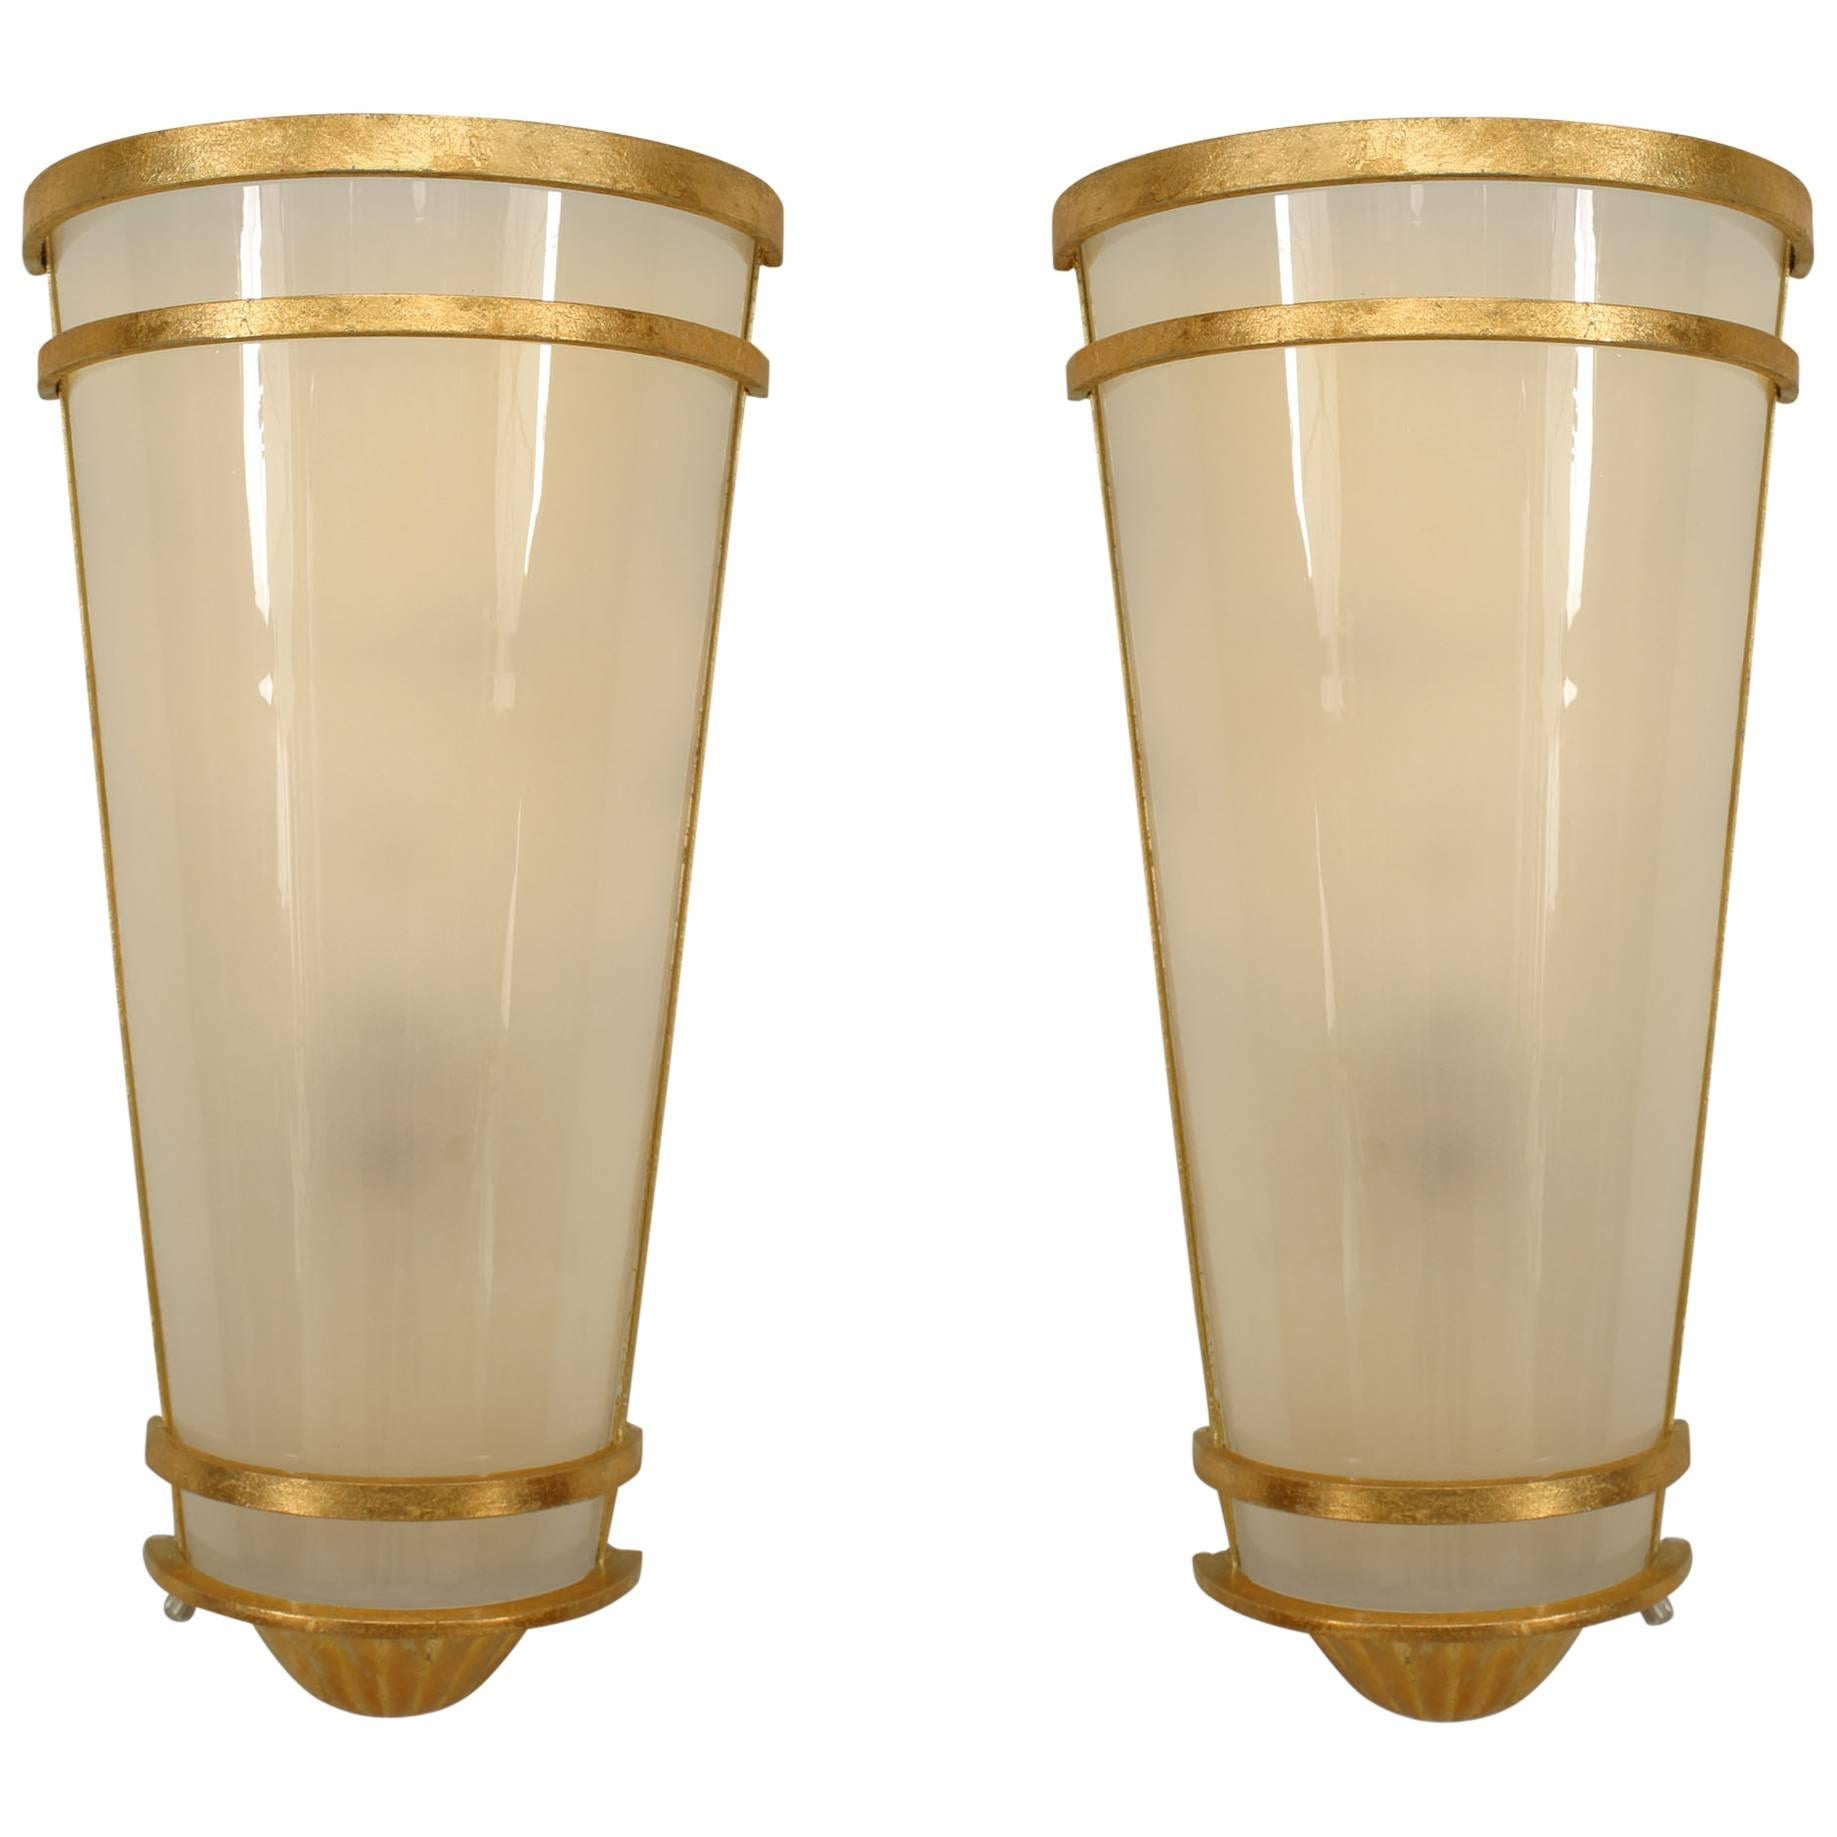 Pair of Cylindrical Gilt-Trimmed Frosted Glass Wall Sconces